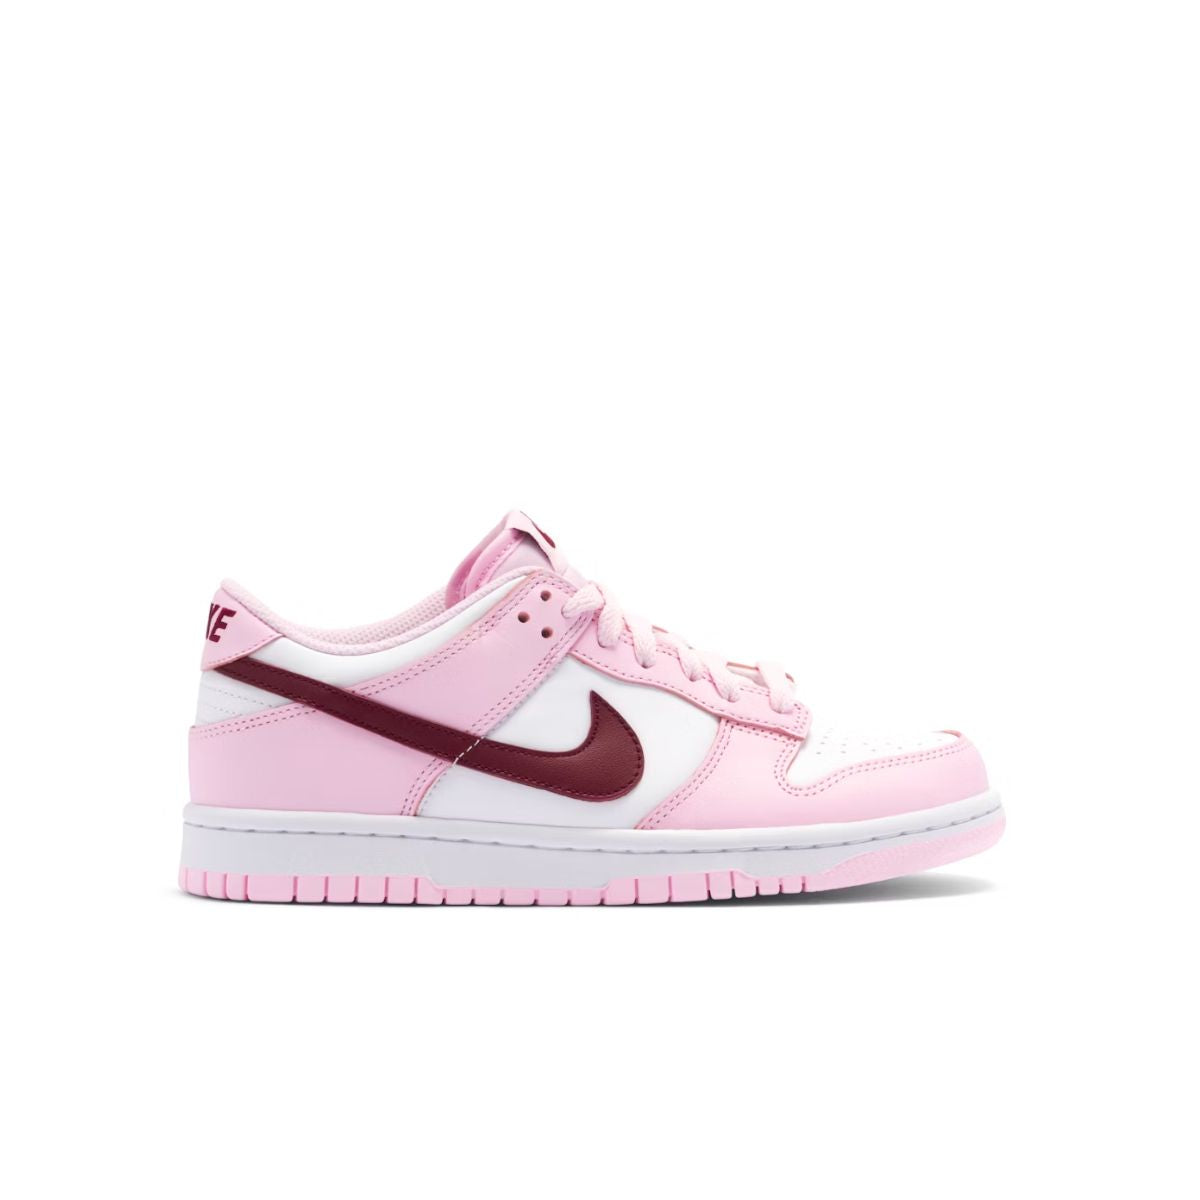 Pink Nike Dunks Shoelace Replacements